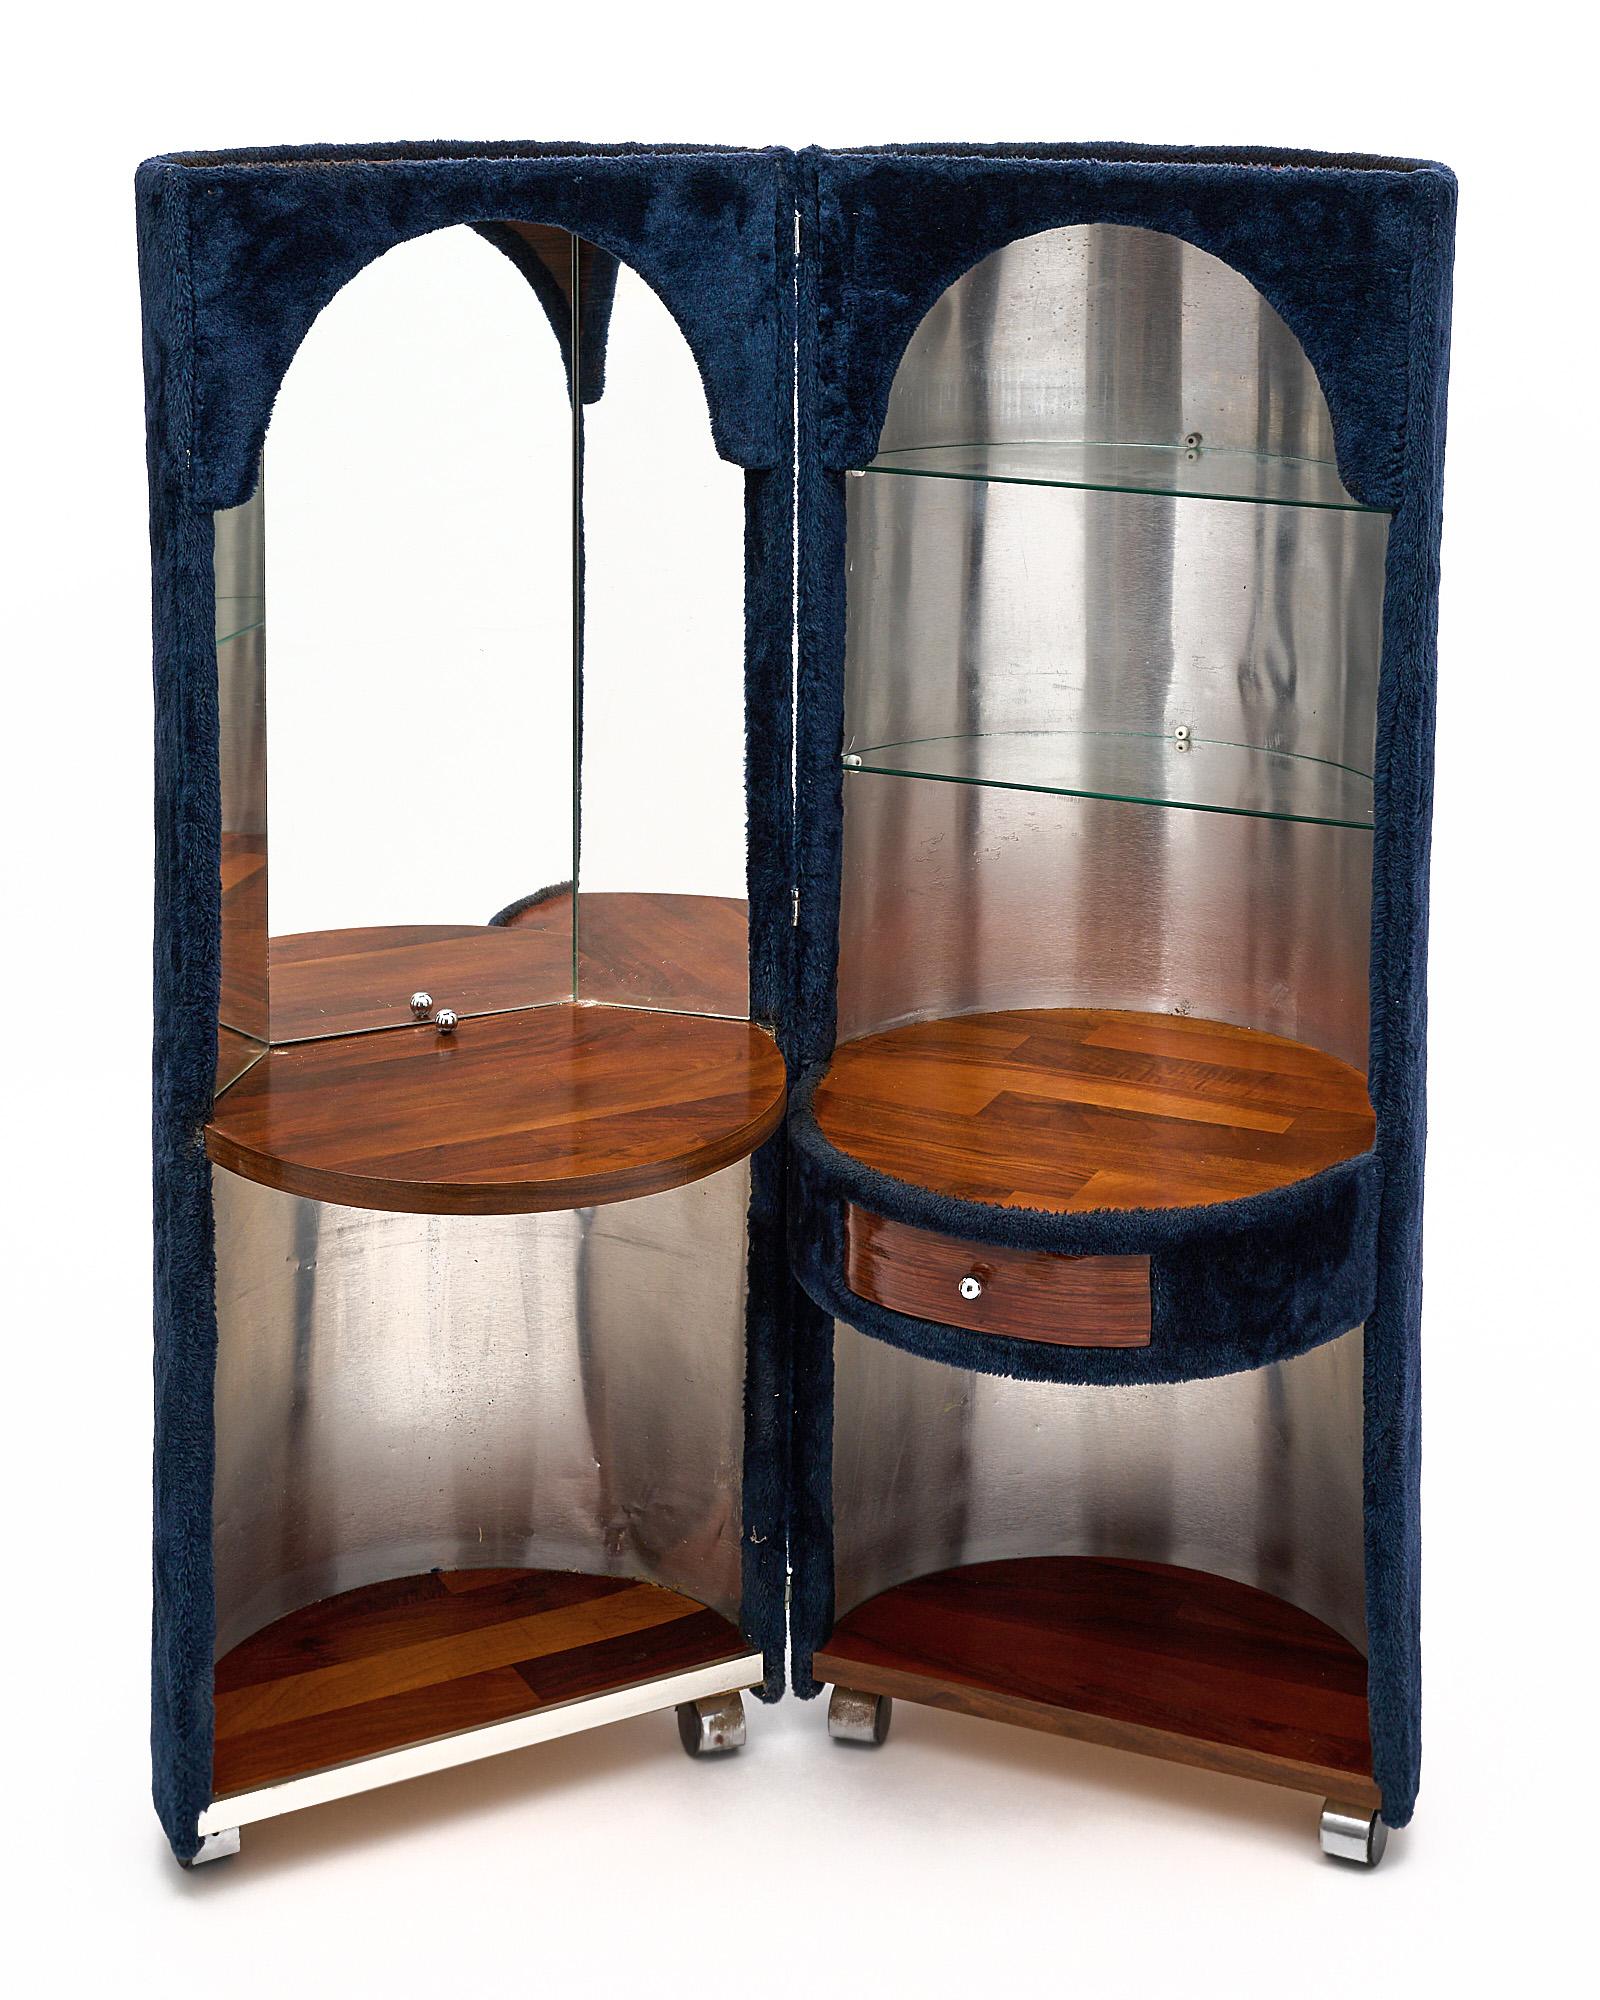 Wonderful Poltrona Frau blue faux fur dressing table designed by Luigi Massoni in the 1970s. It features a cylindrical shape that folds out in two split vanities, featuring a mirror on one side and glass shelves on the other. There is a single